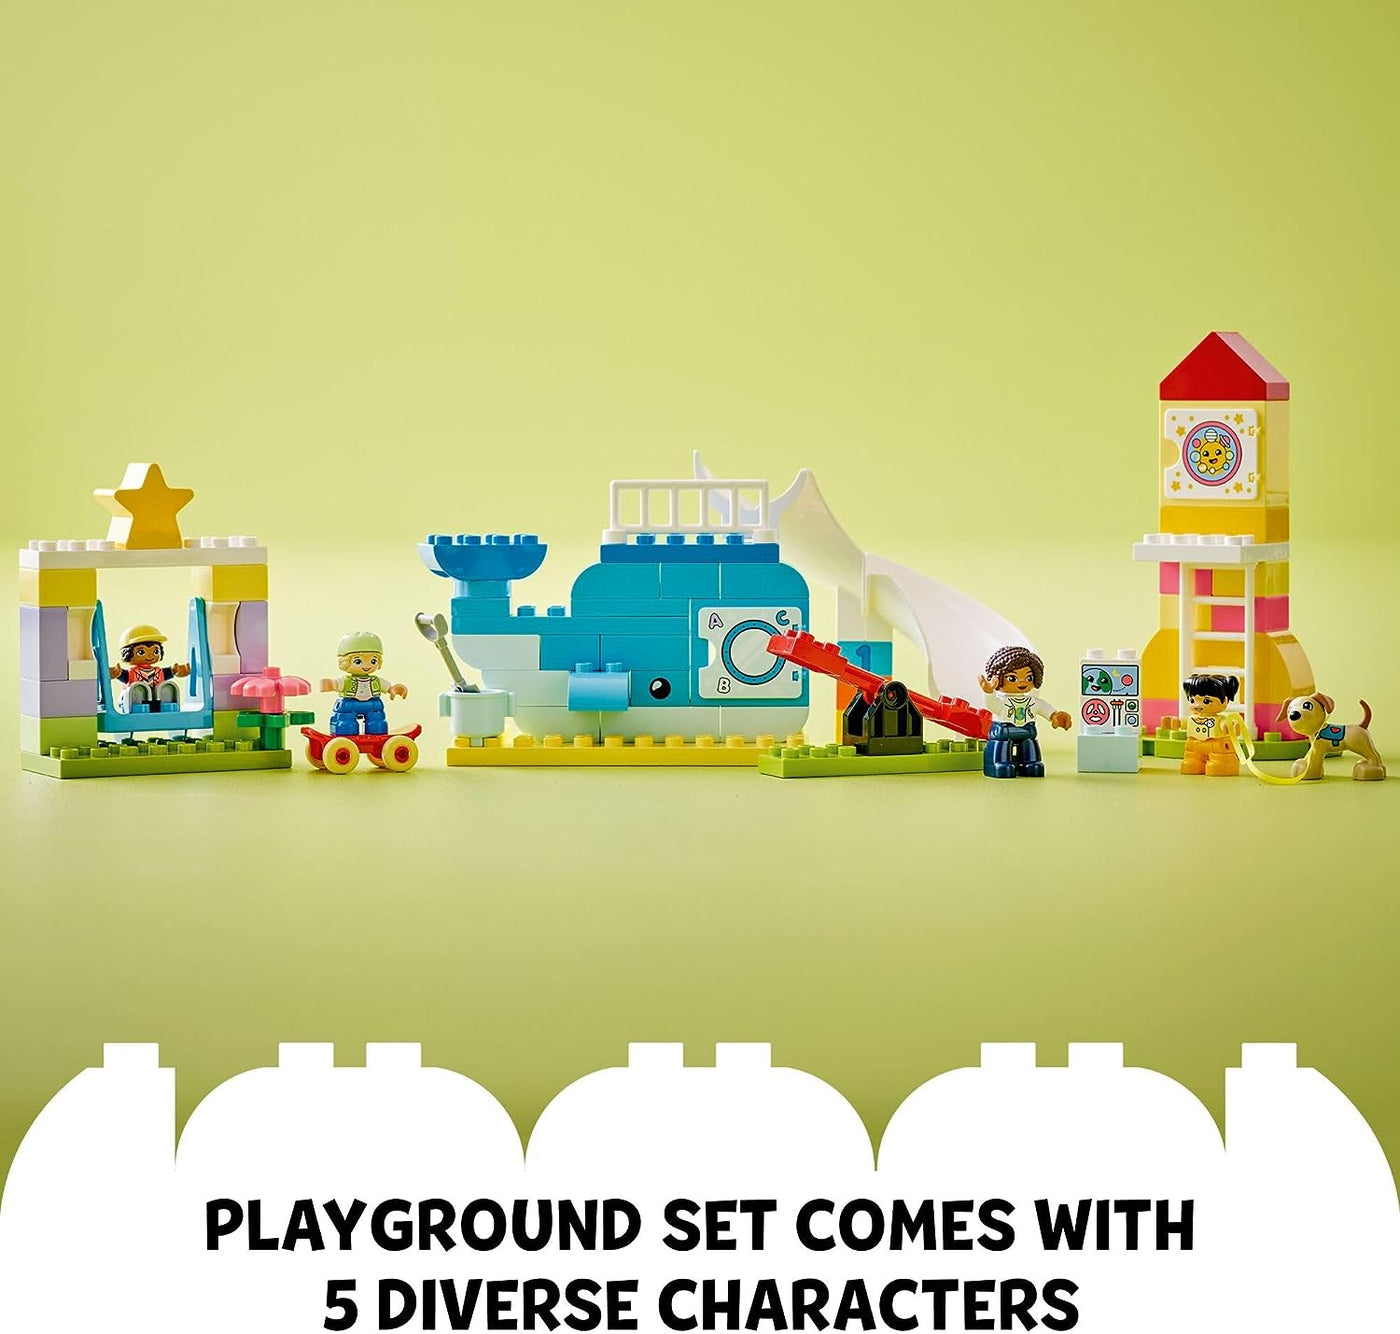 LEGO DUPLO Town Dream Playground 10991 Building Toy Set for Toddlers - $30